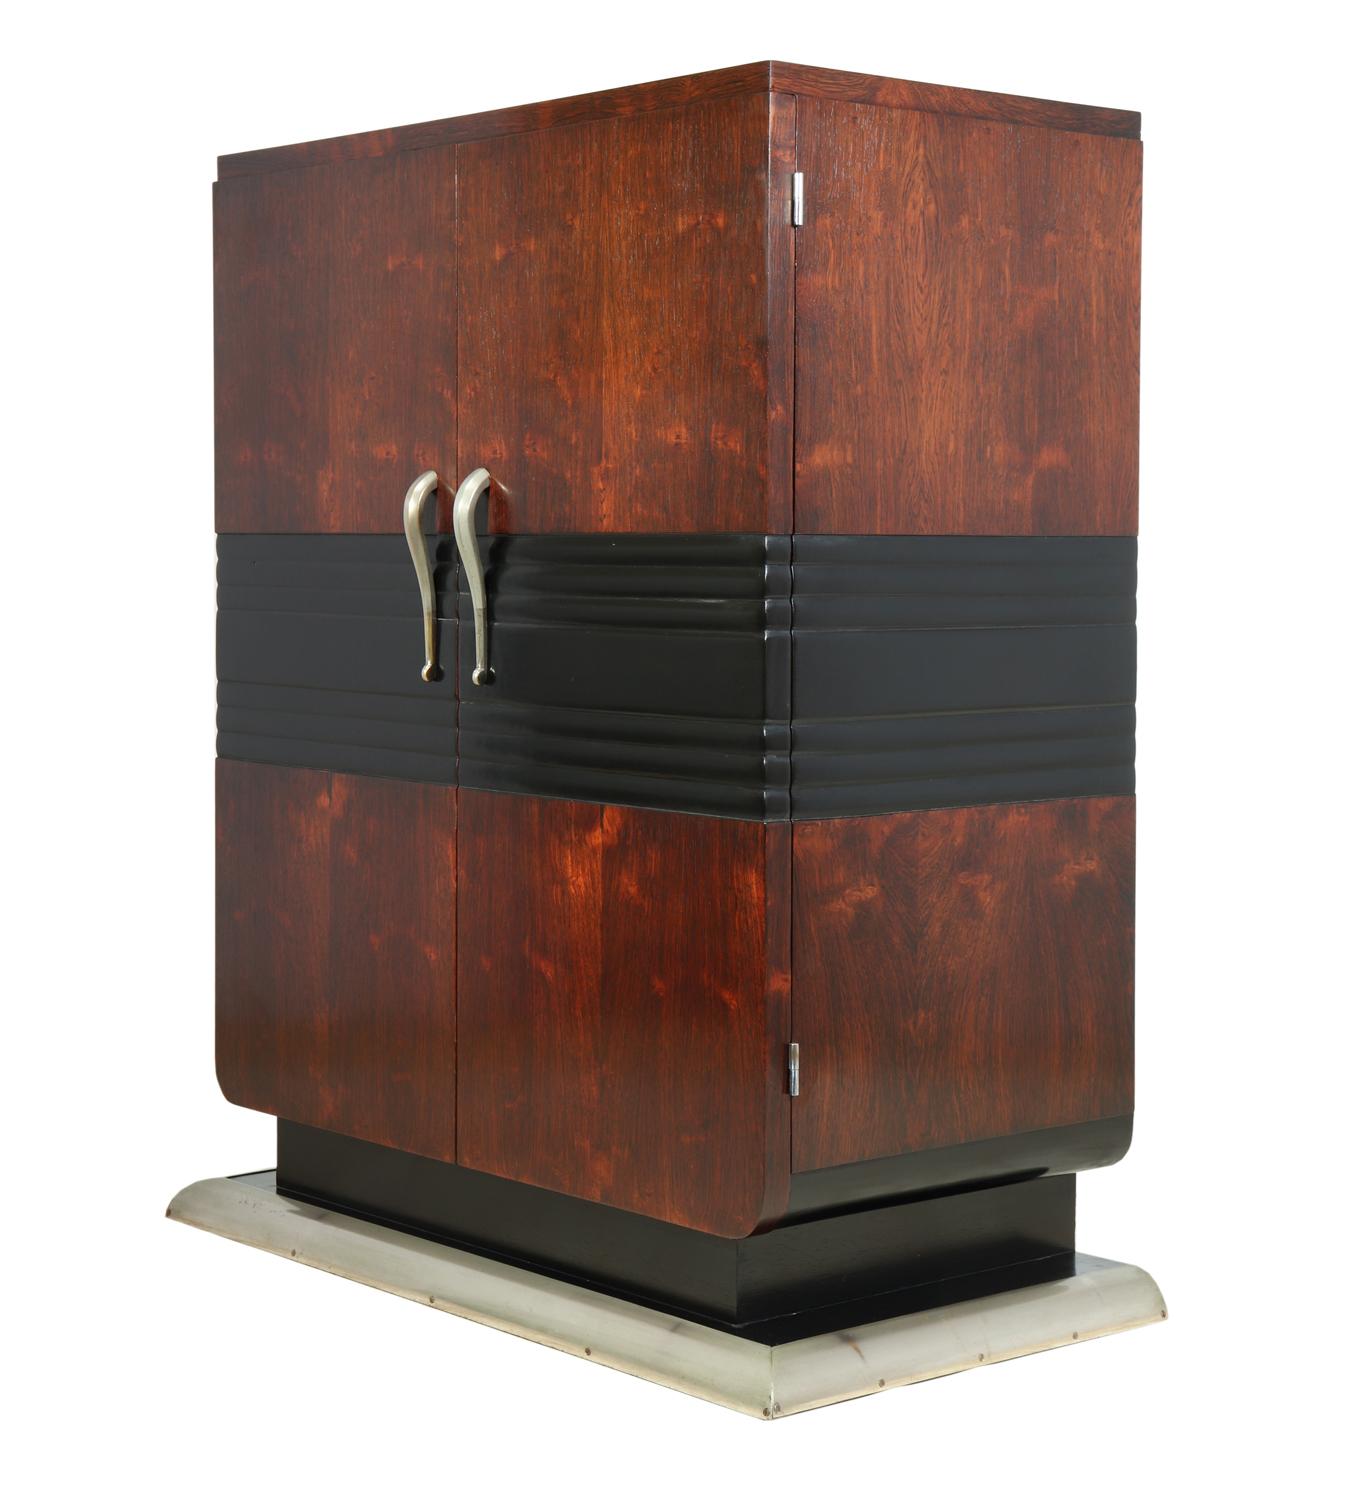 French Art Deco Rosewood Cocktail Cabinet, circa 1930 In Excellent Condition For Sale In Paddock Wood, Kent